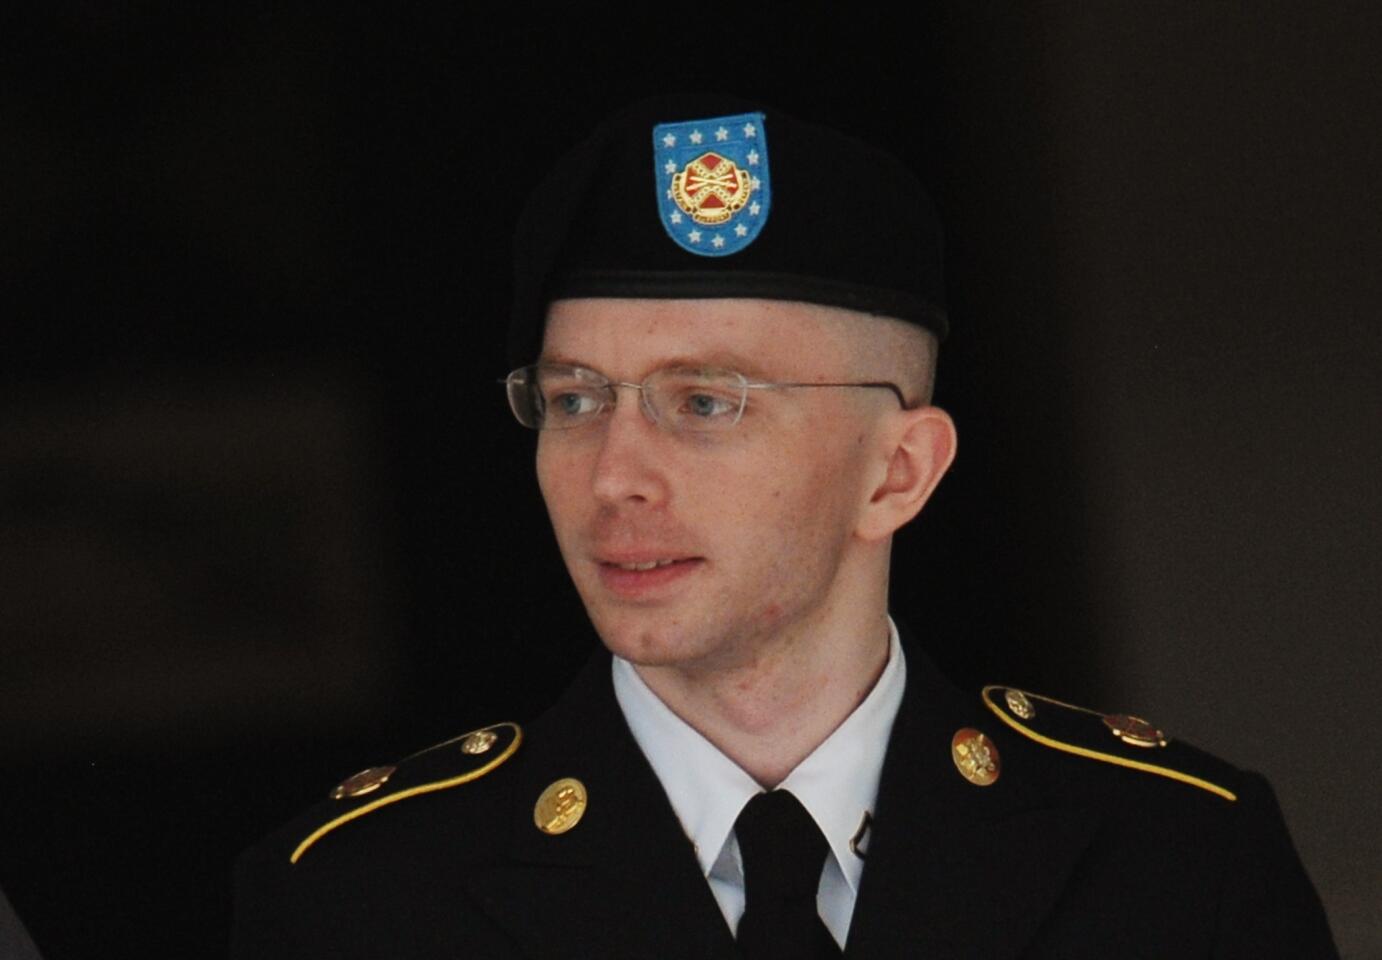 Army Pfc. Chelsea Manning